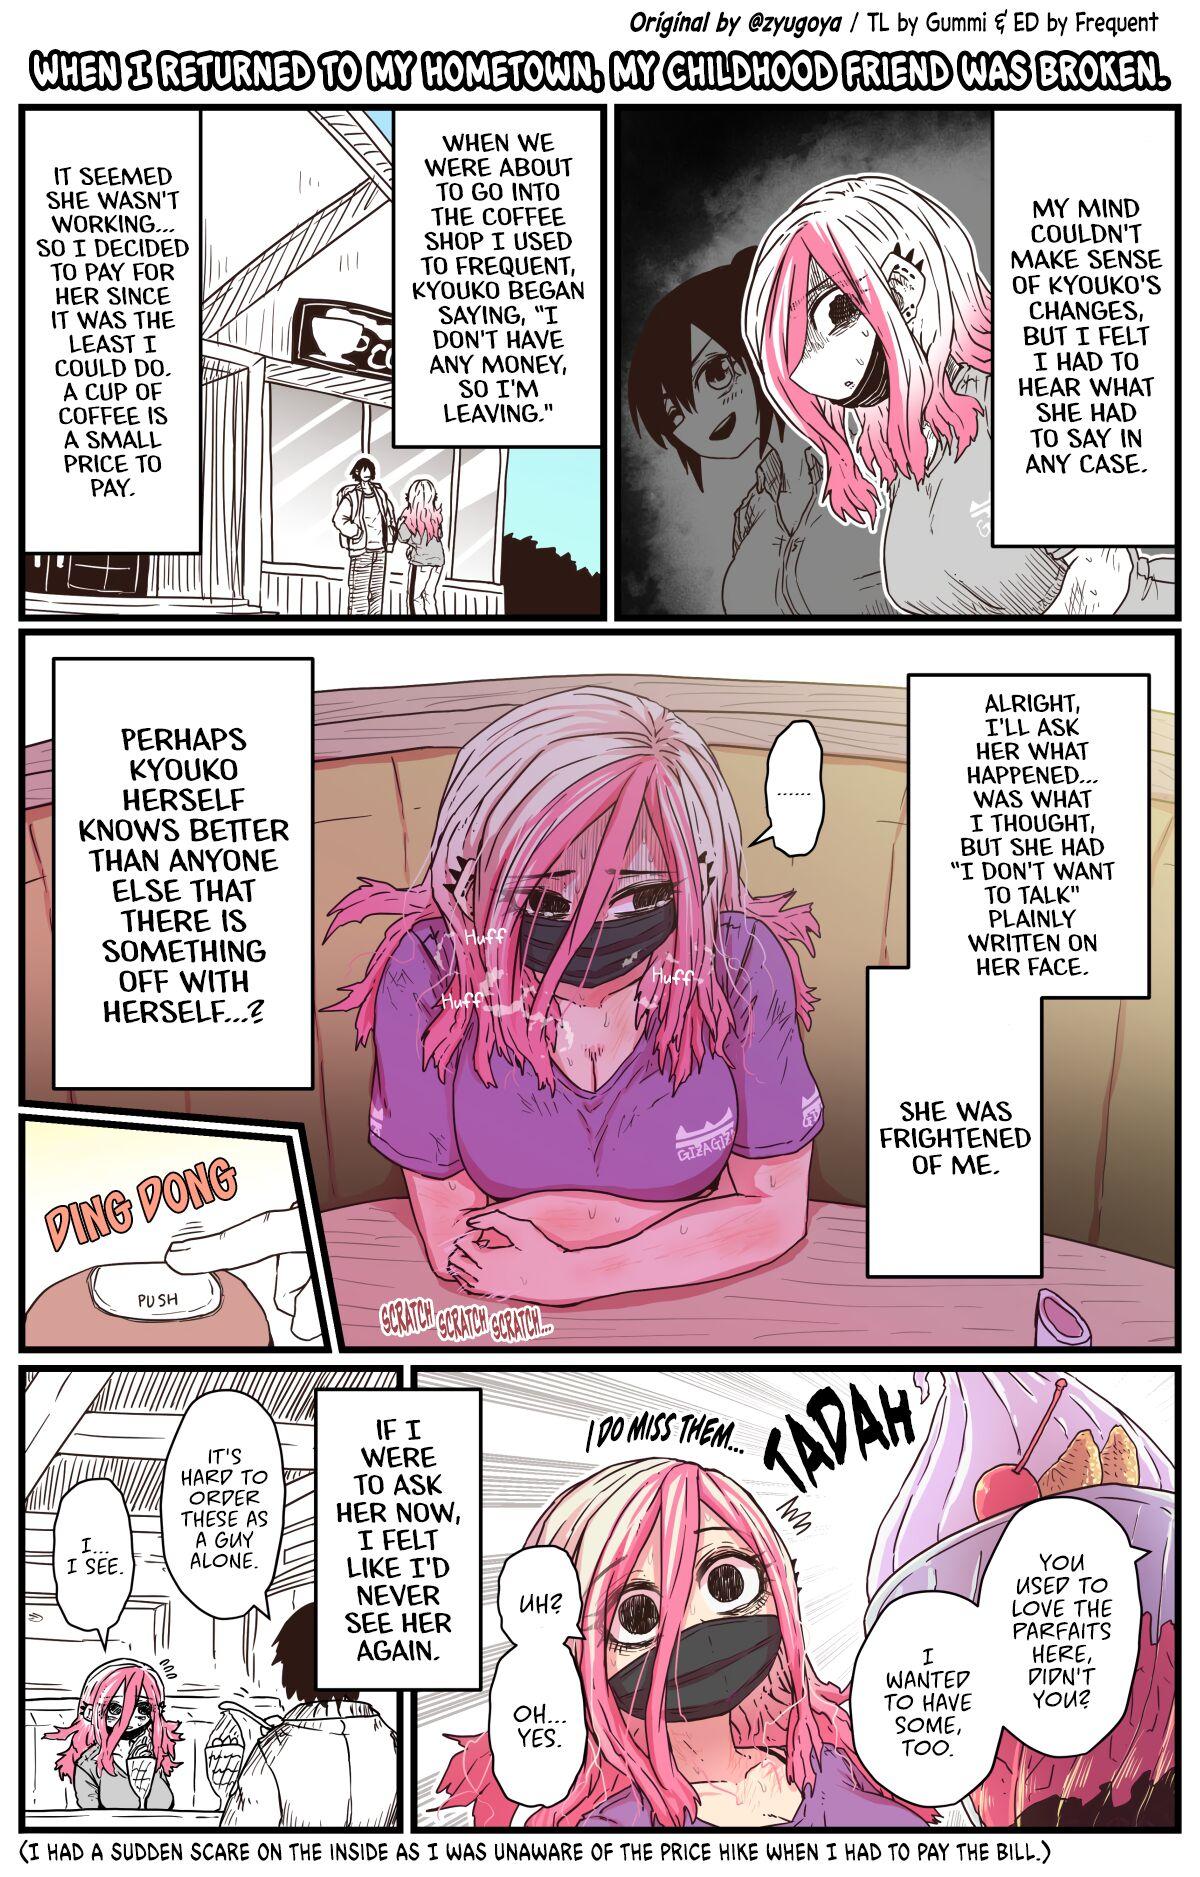 Taboo When I Returned to My Hometown, My Childhood Friend was Broken - Original Tites - Page 2